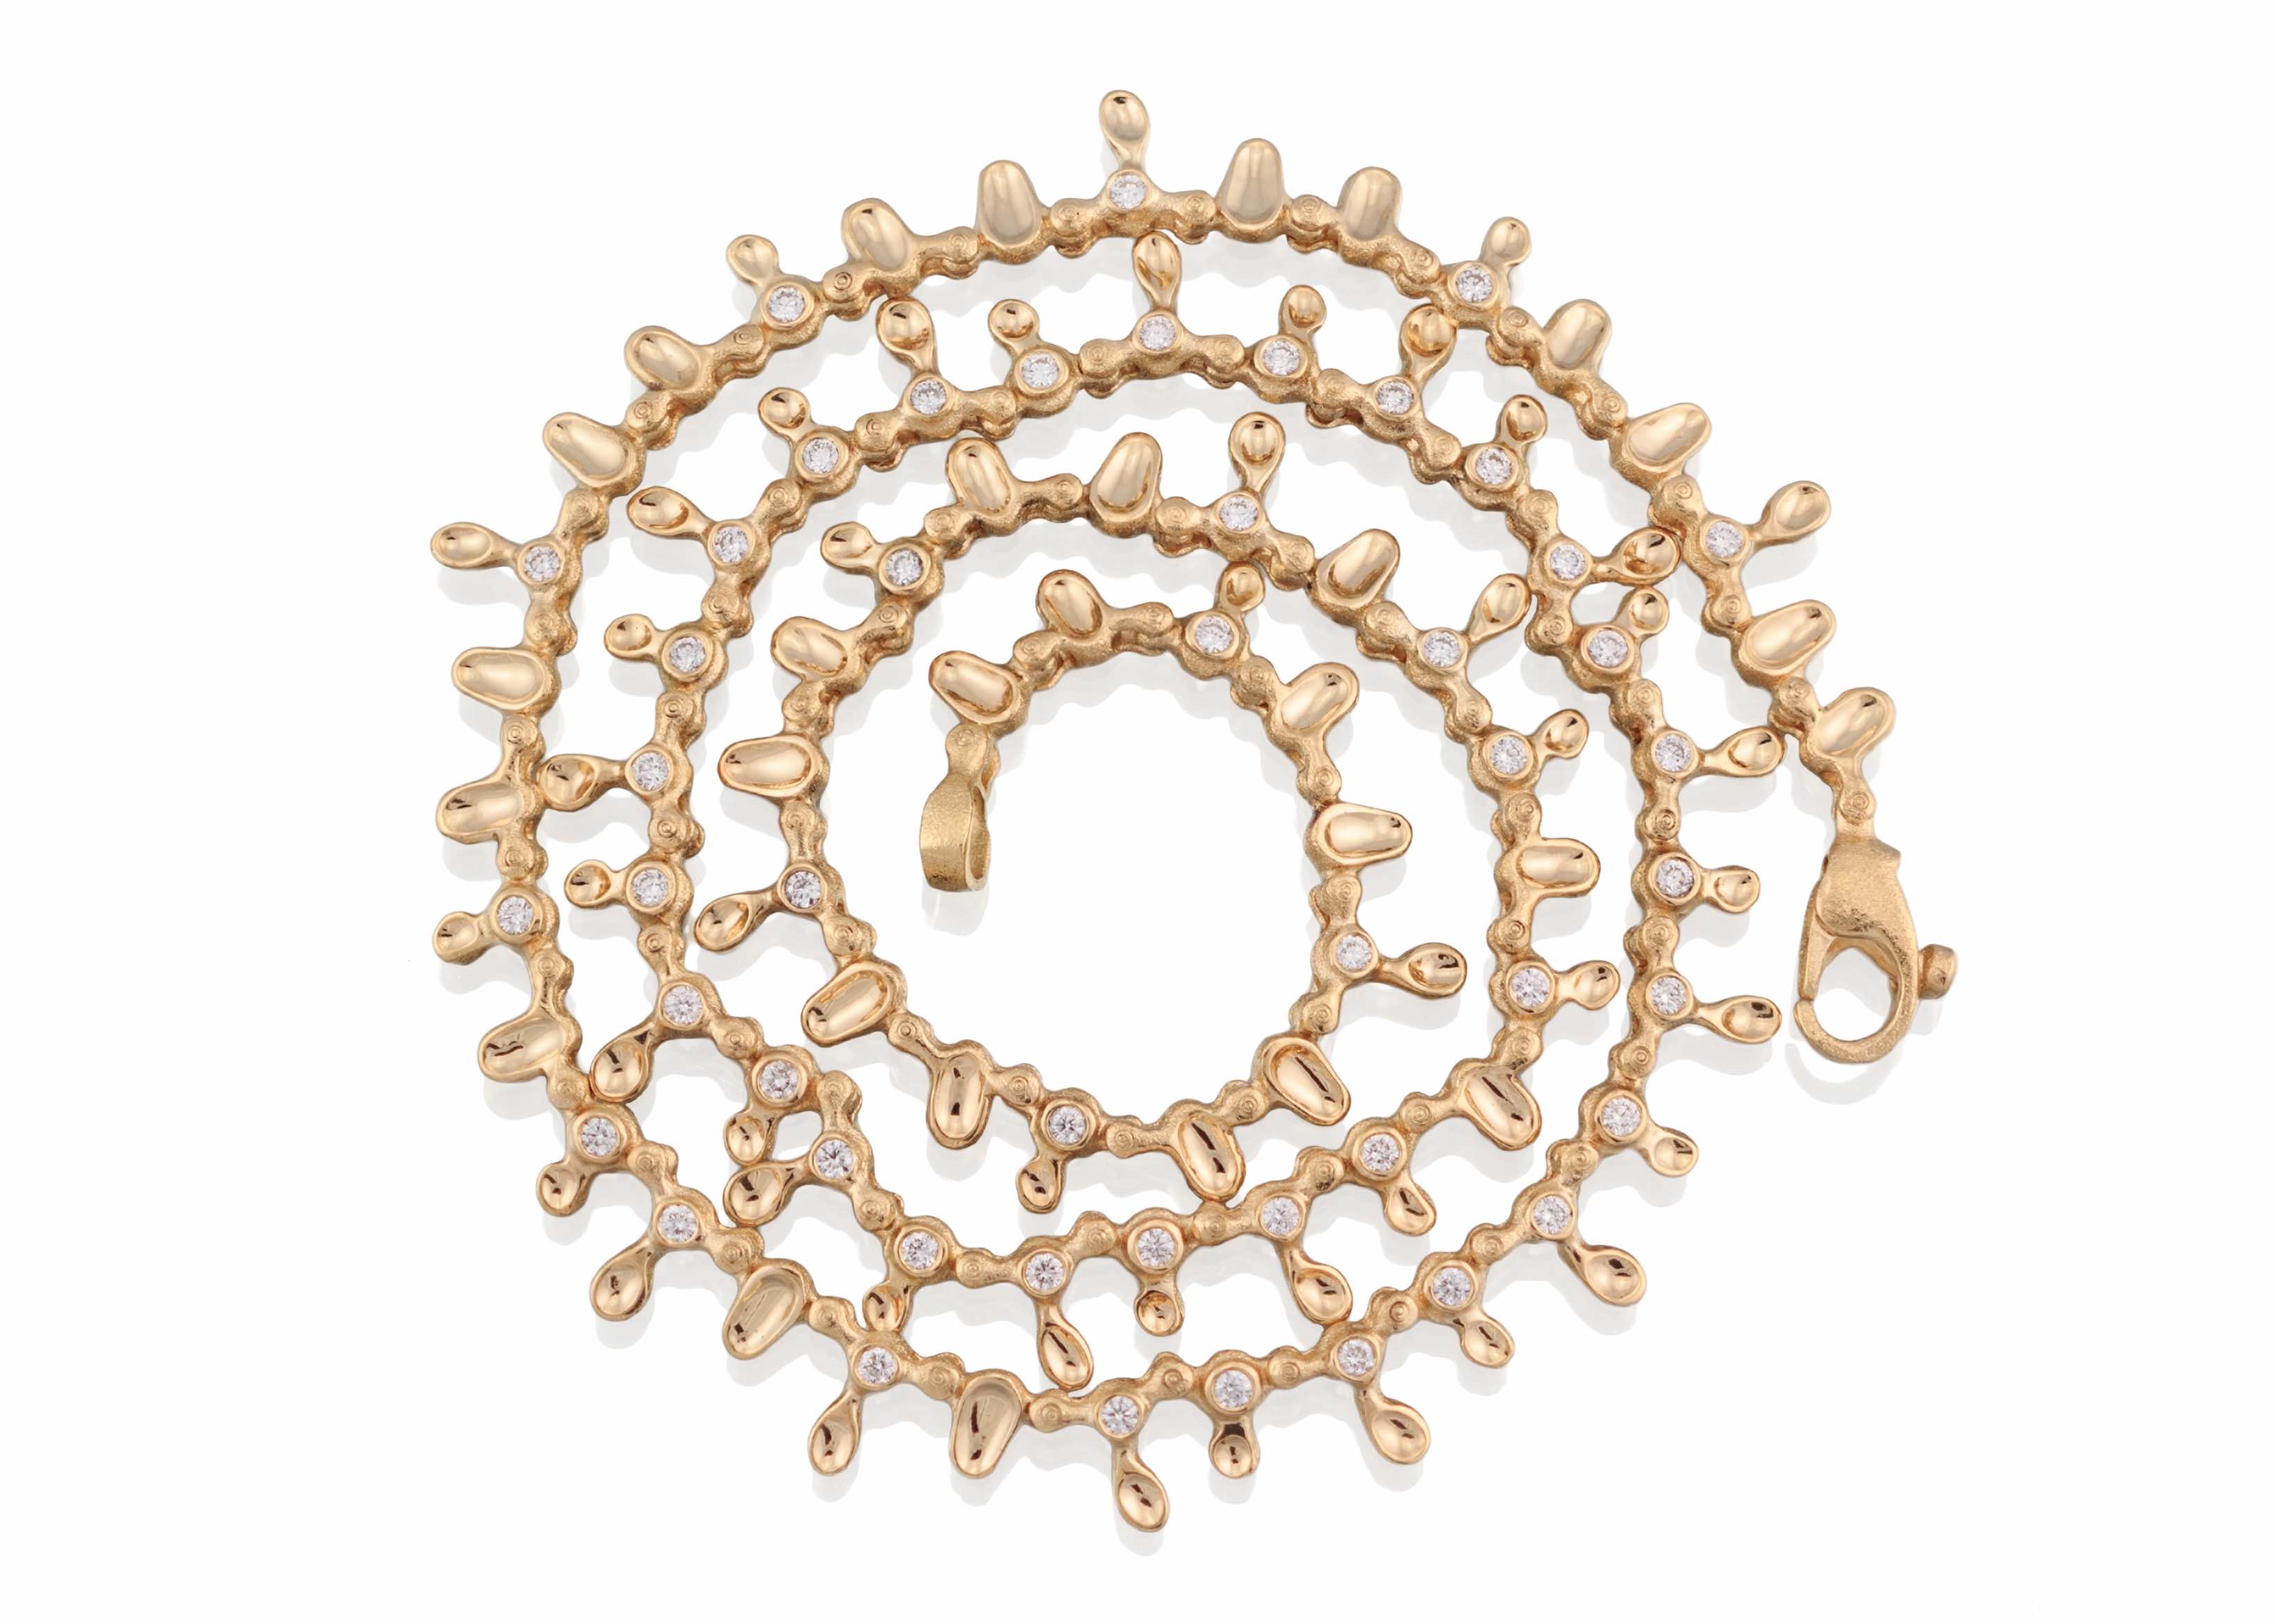 Dew Drops. 18K yellow gold and white diamond necklace, 19in. length by Audrius Krulis